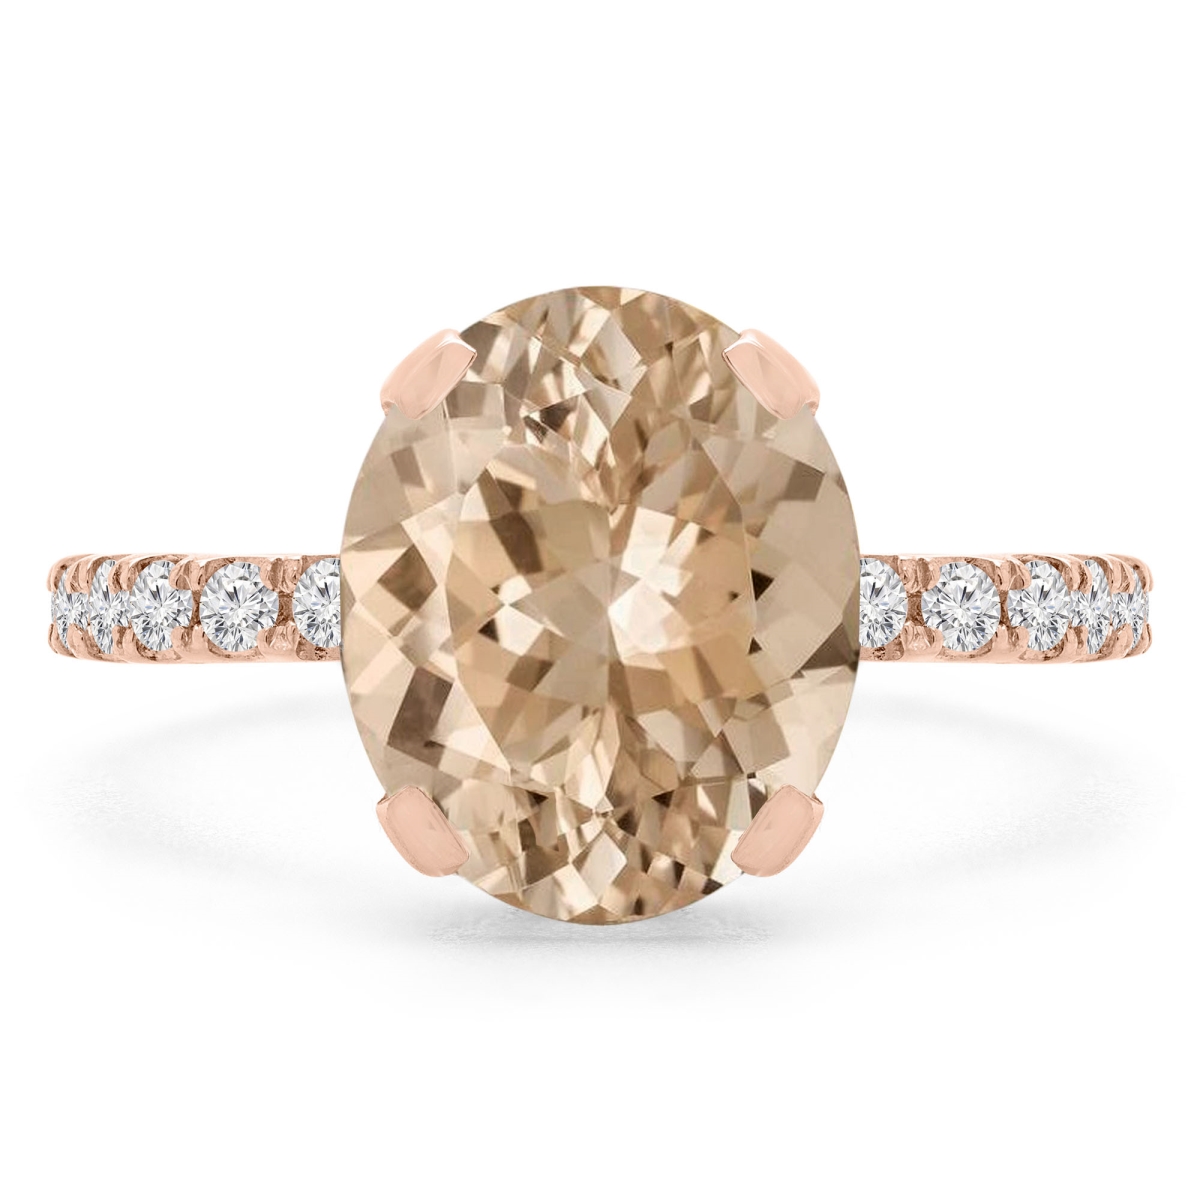 Picture of Majesty Diamonds MD190407-7 3.4 CTW Oval Pink Morganite Under Halo Engagement Ring in 14K Rose Gold - Size 7